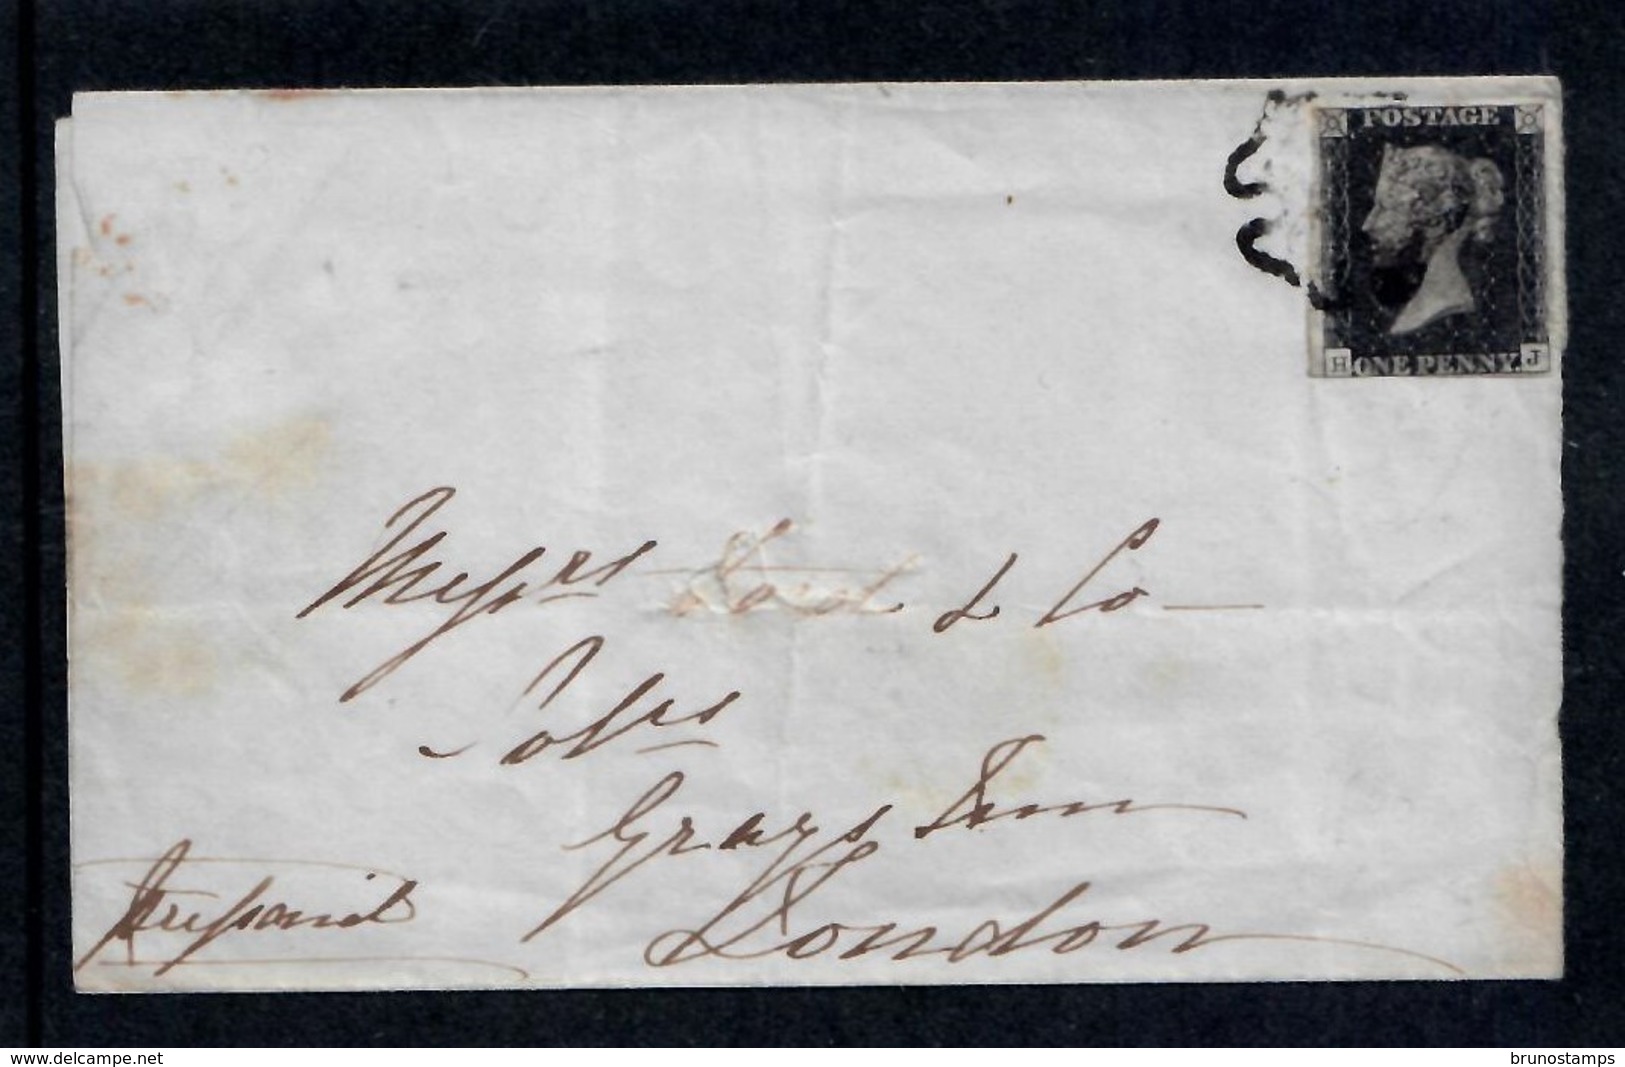 GREAT BRITAIN - 1840  1d BLACK 4 MARGINS  ON COVER  GOOD QUALITY - Storia Postale